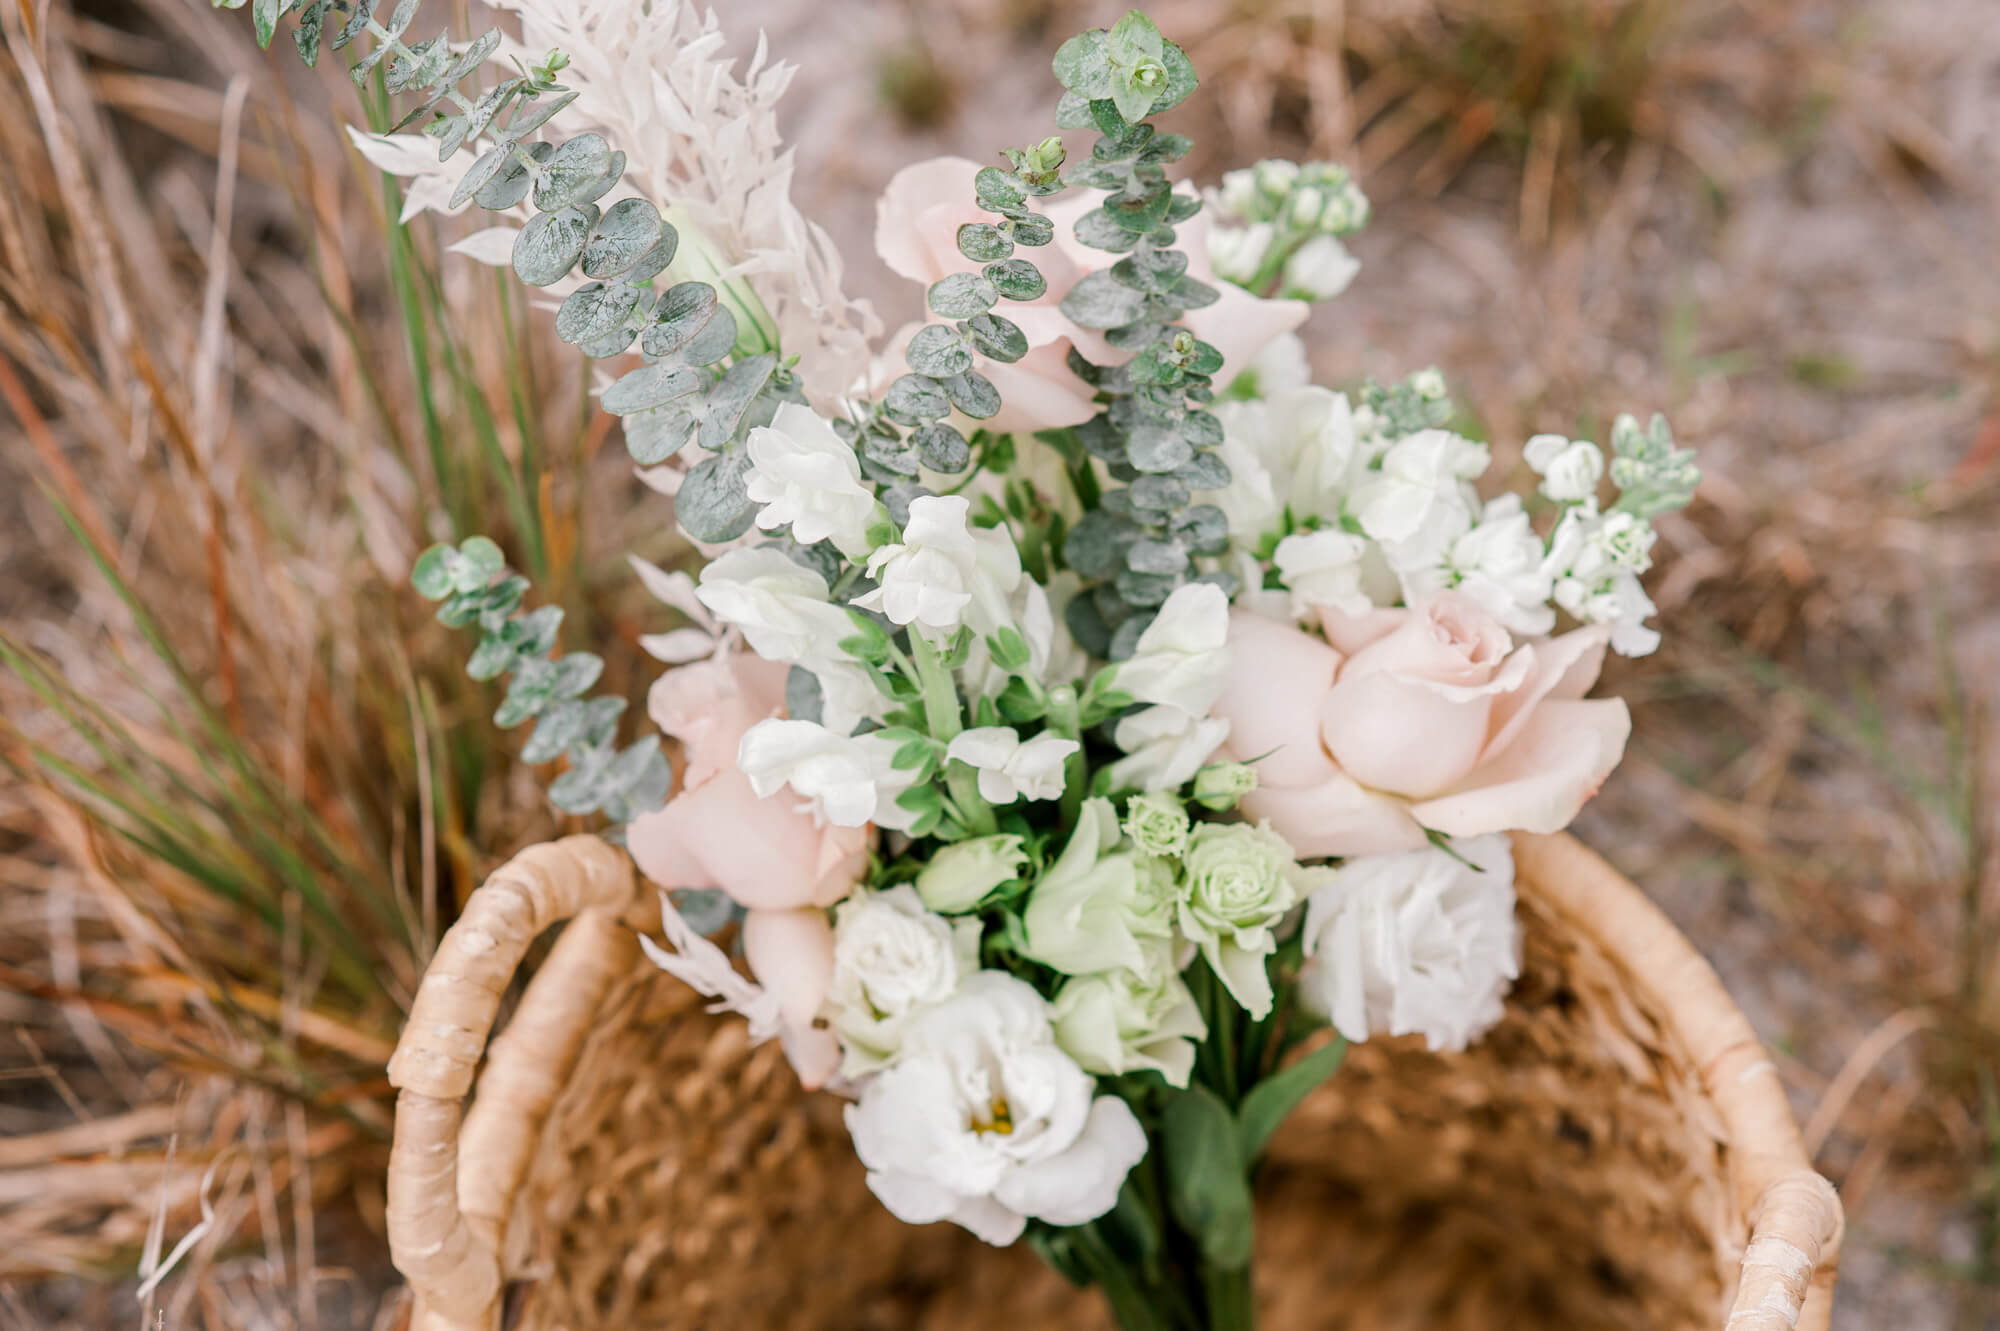 A bouquet of florals in a wicker basket in the middle of a tall grass field.